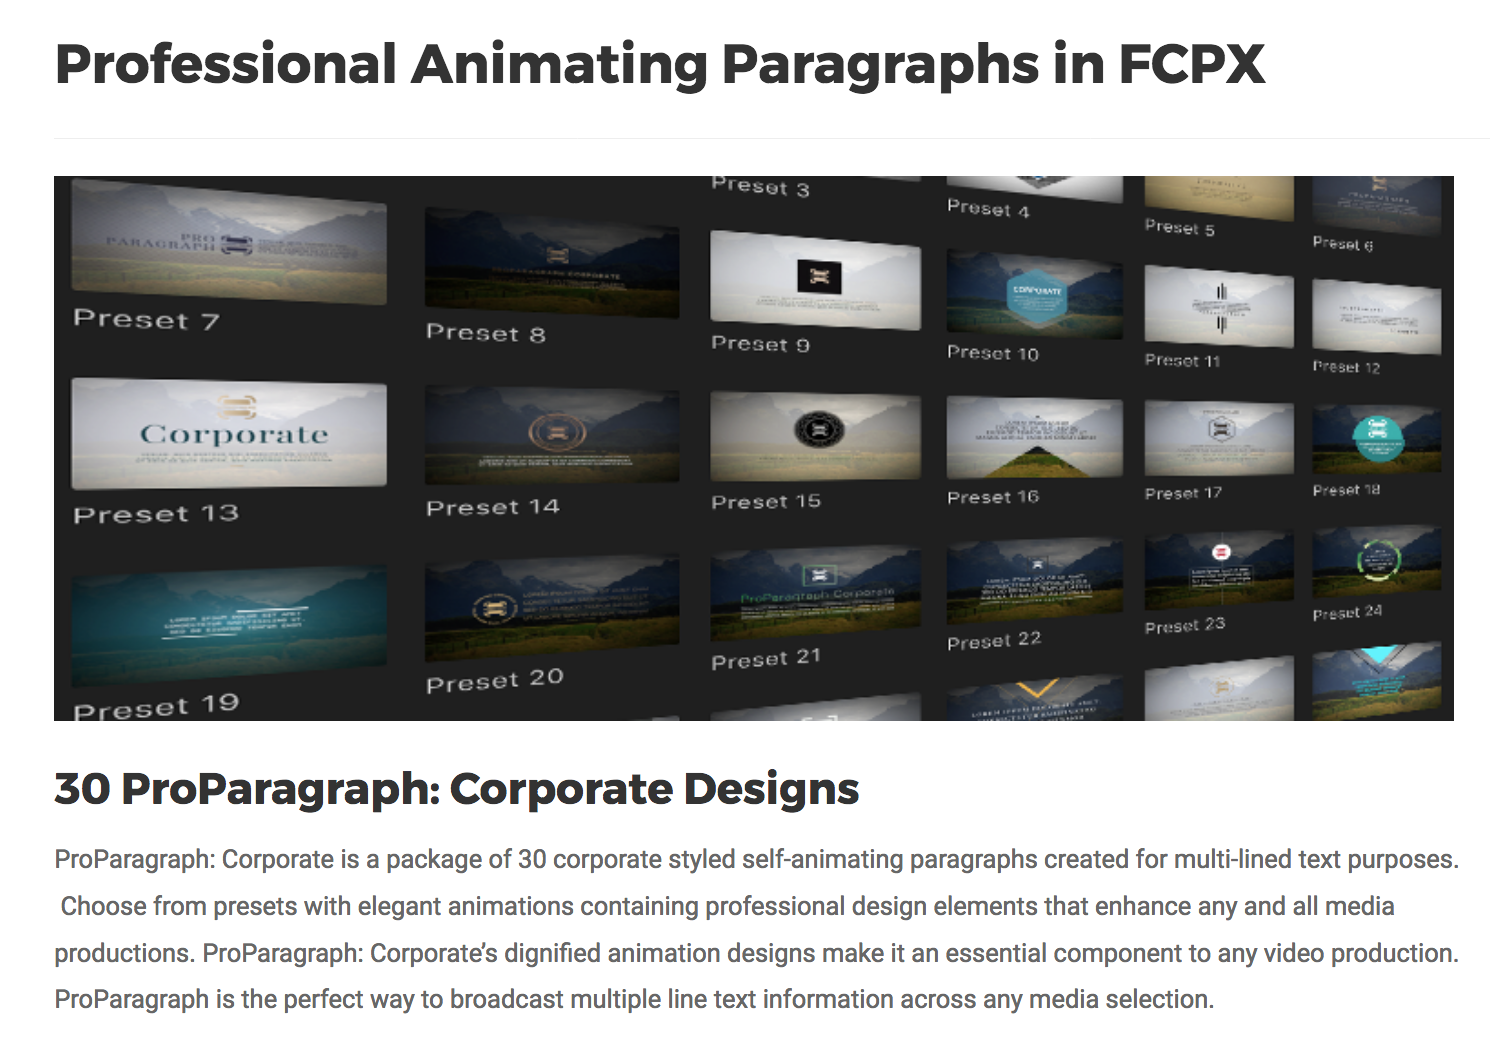 ProParagraph Corporate - Pixel Film Studios - FCPX Effects